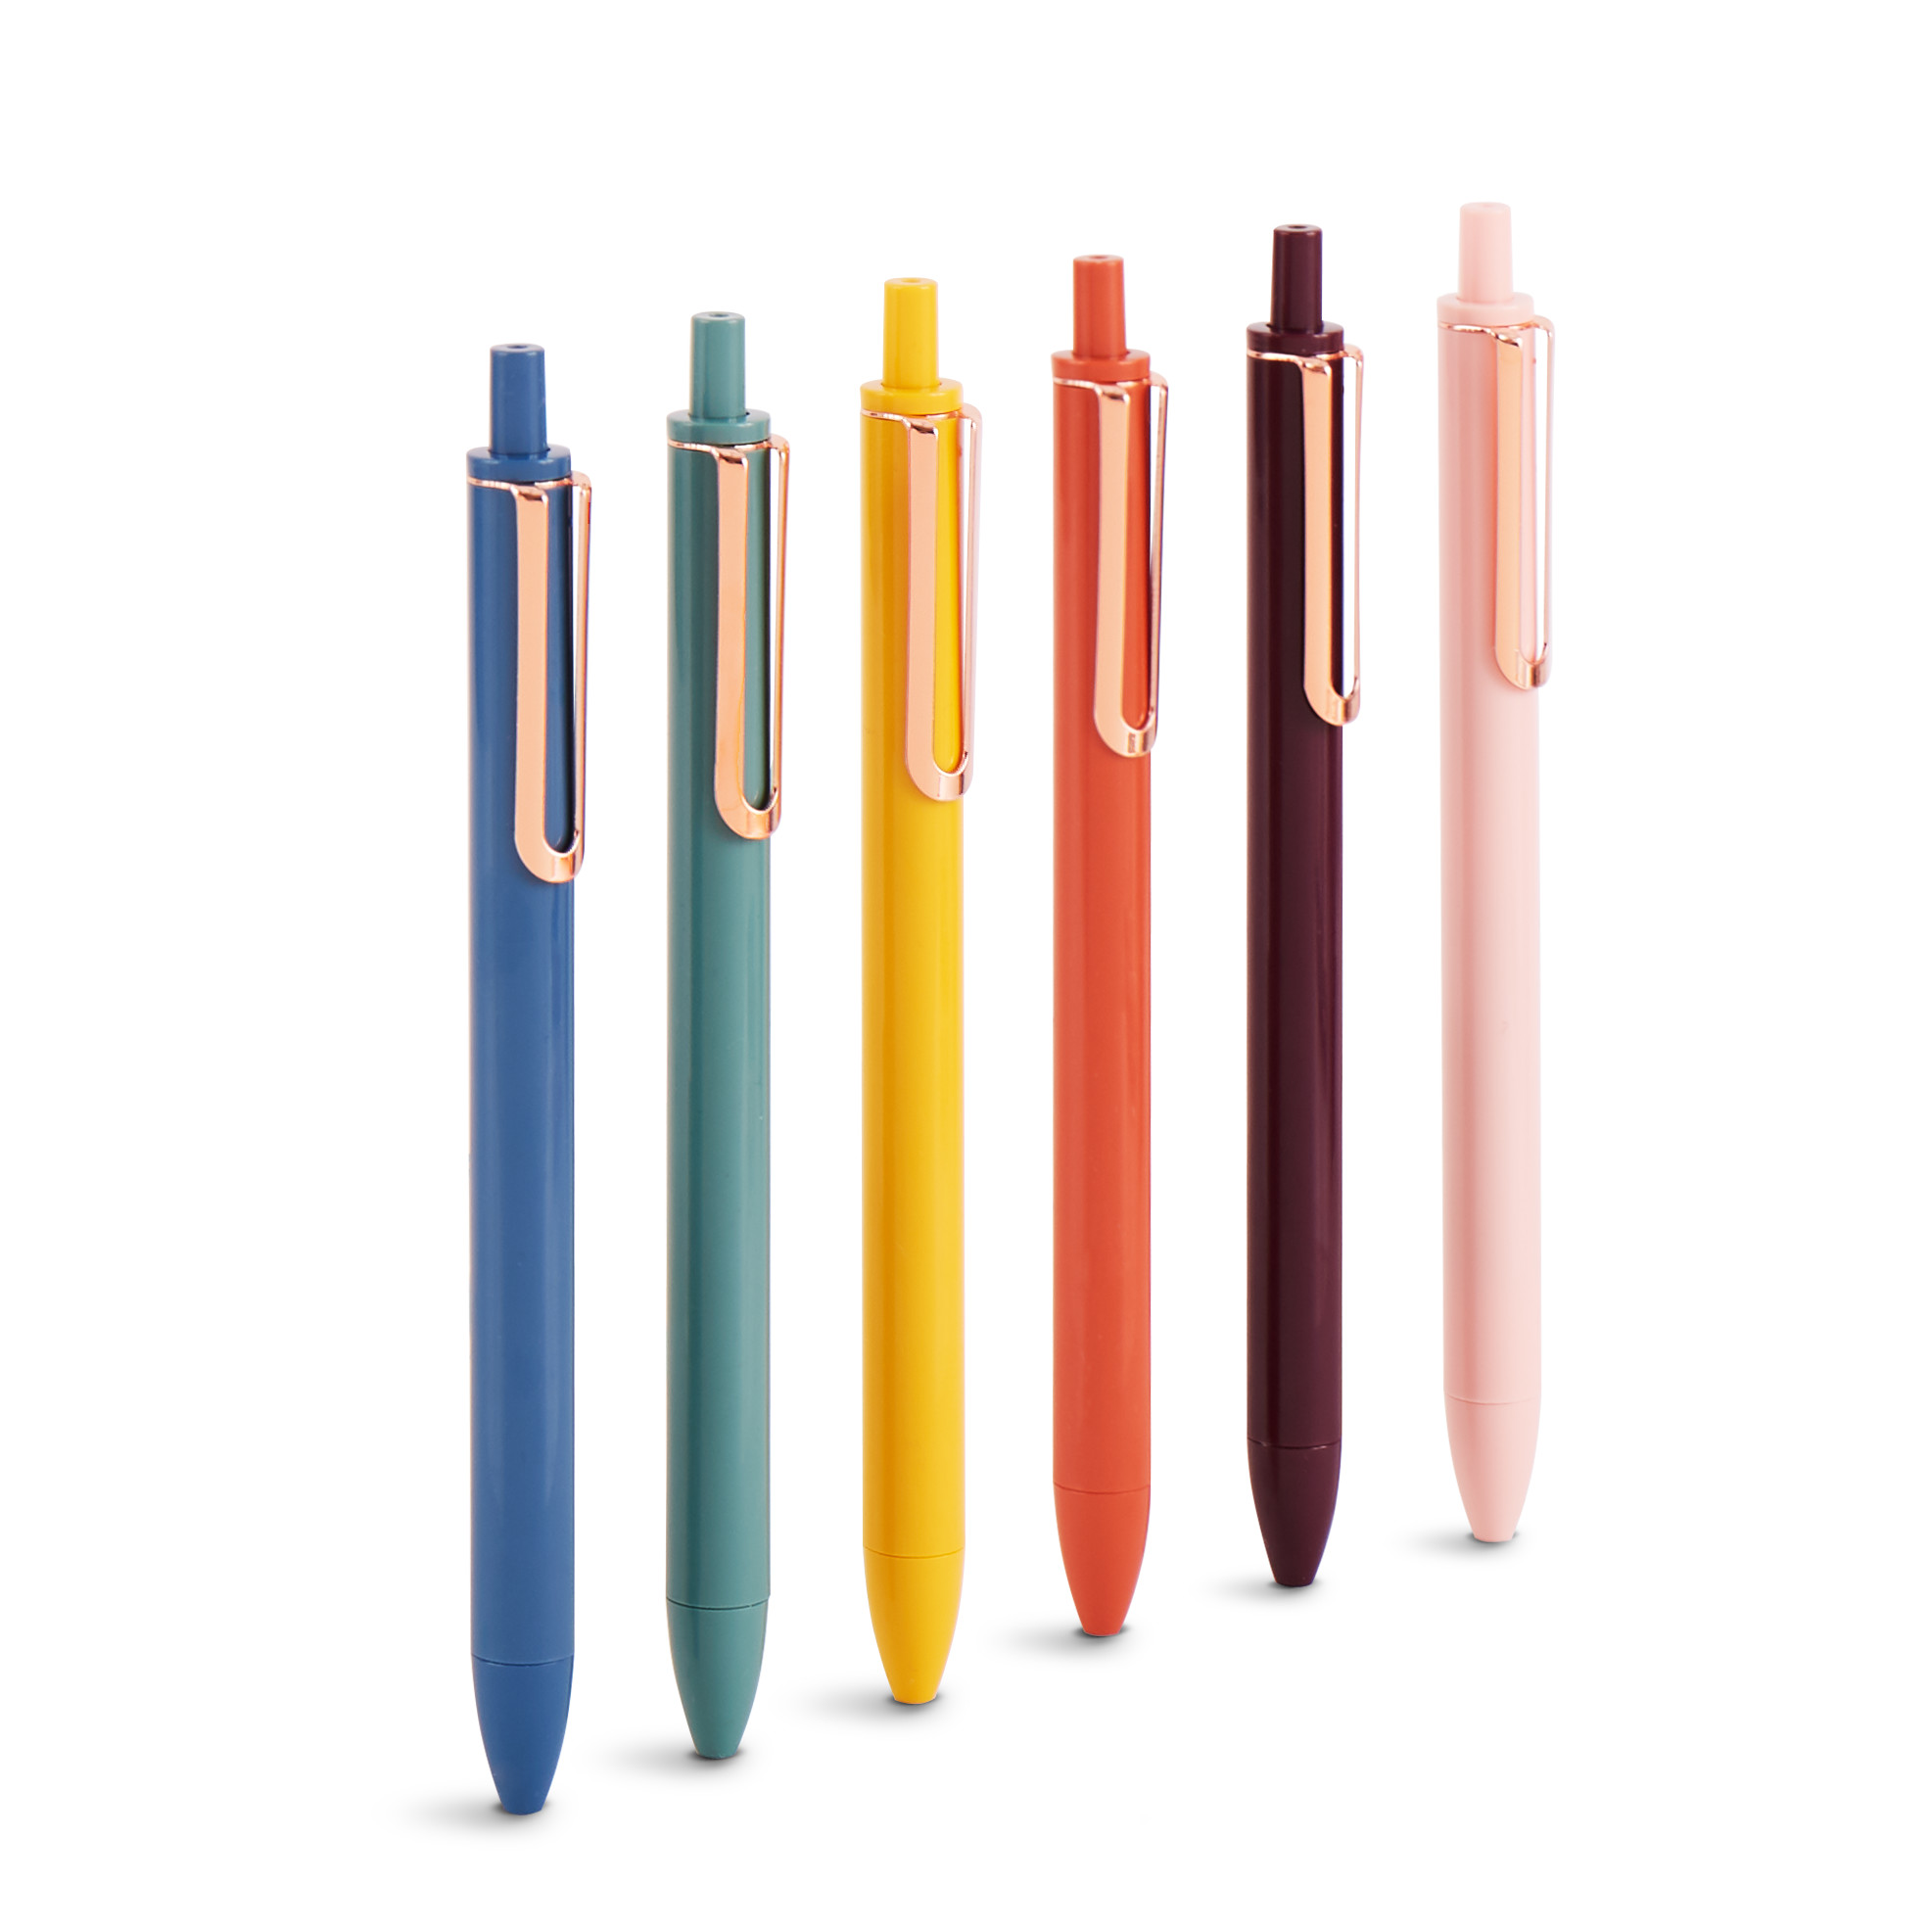 https://poppin.imgix.net/products/2019/poppin_assorted_desert_retractable_gel_luxe_pens_set_of_12_01.jpg